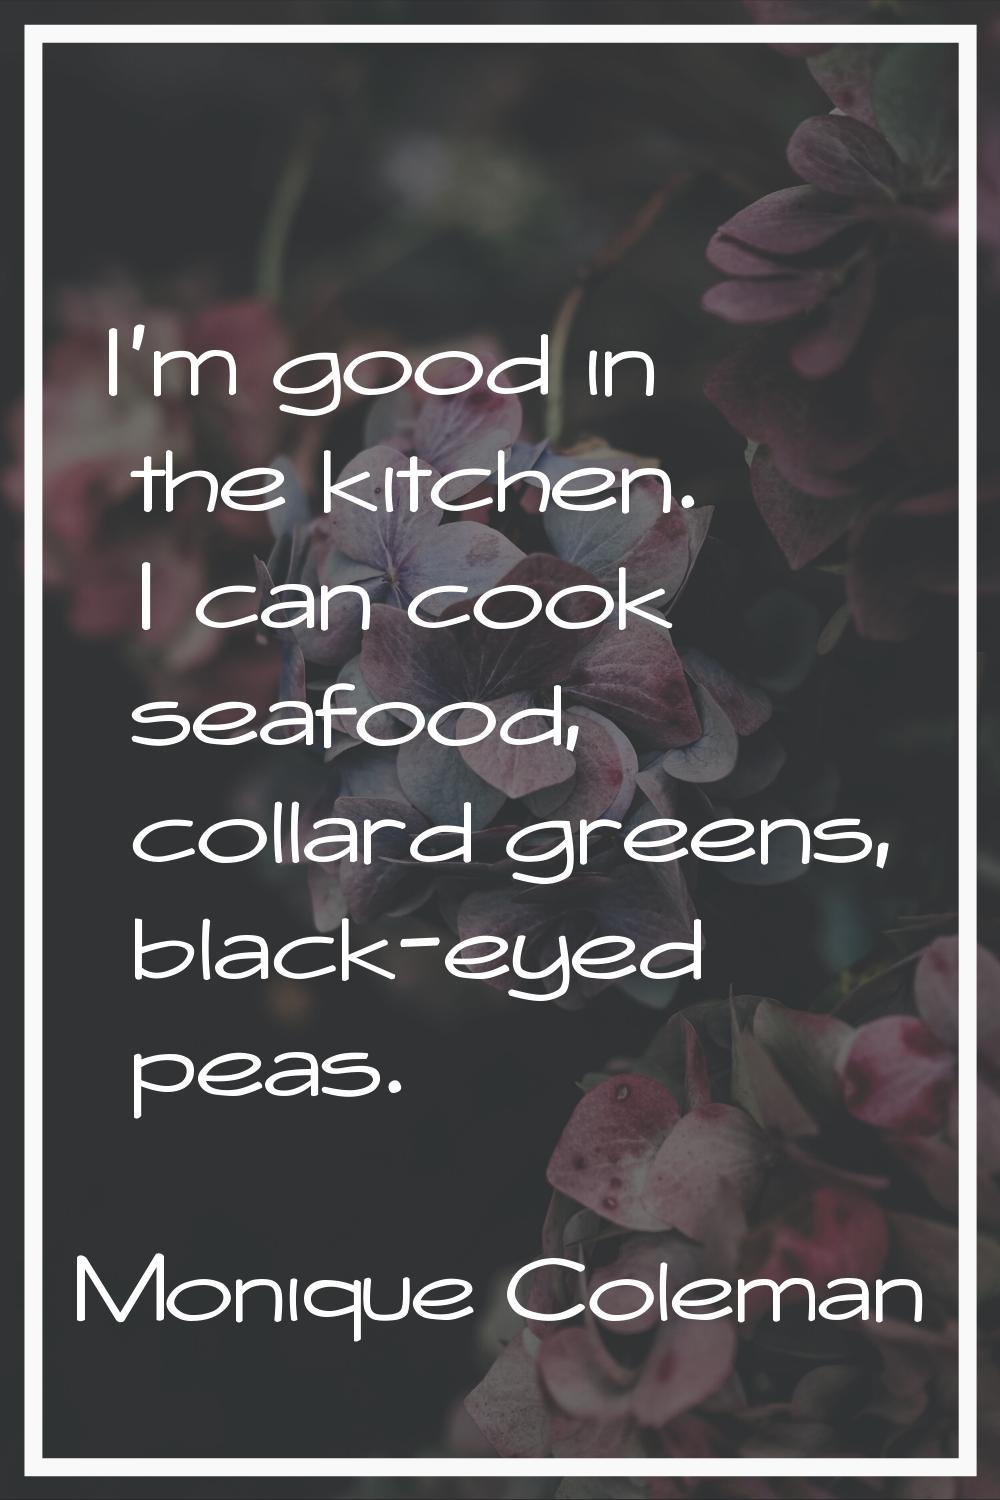 I'm good in the kitchen. I can cook seafood, collard greens, black-eyed peas.